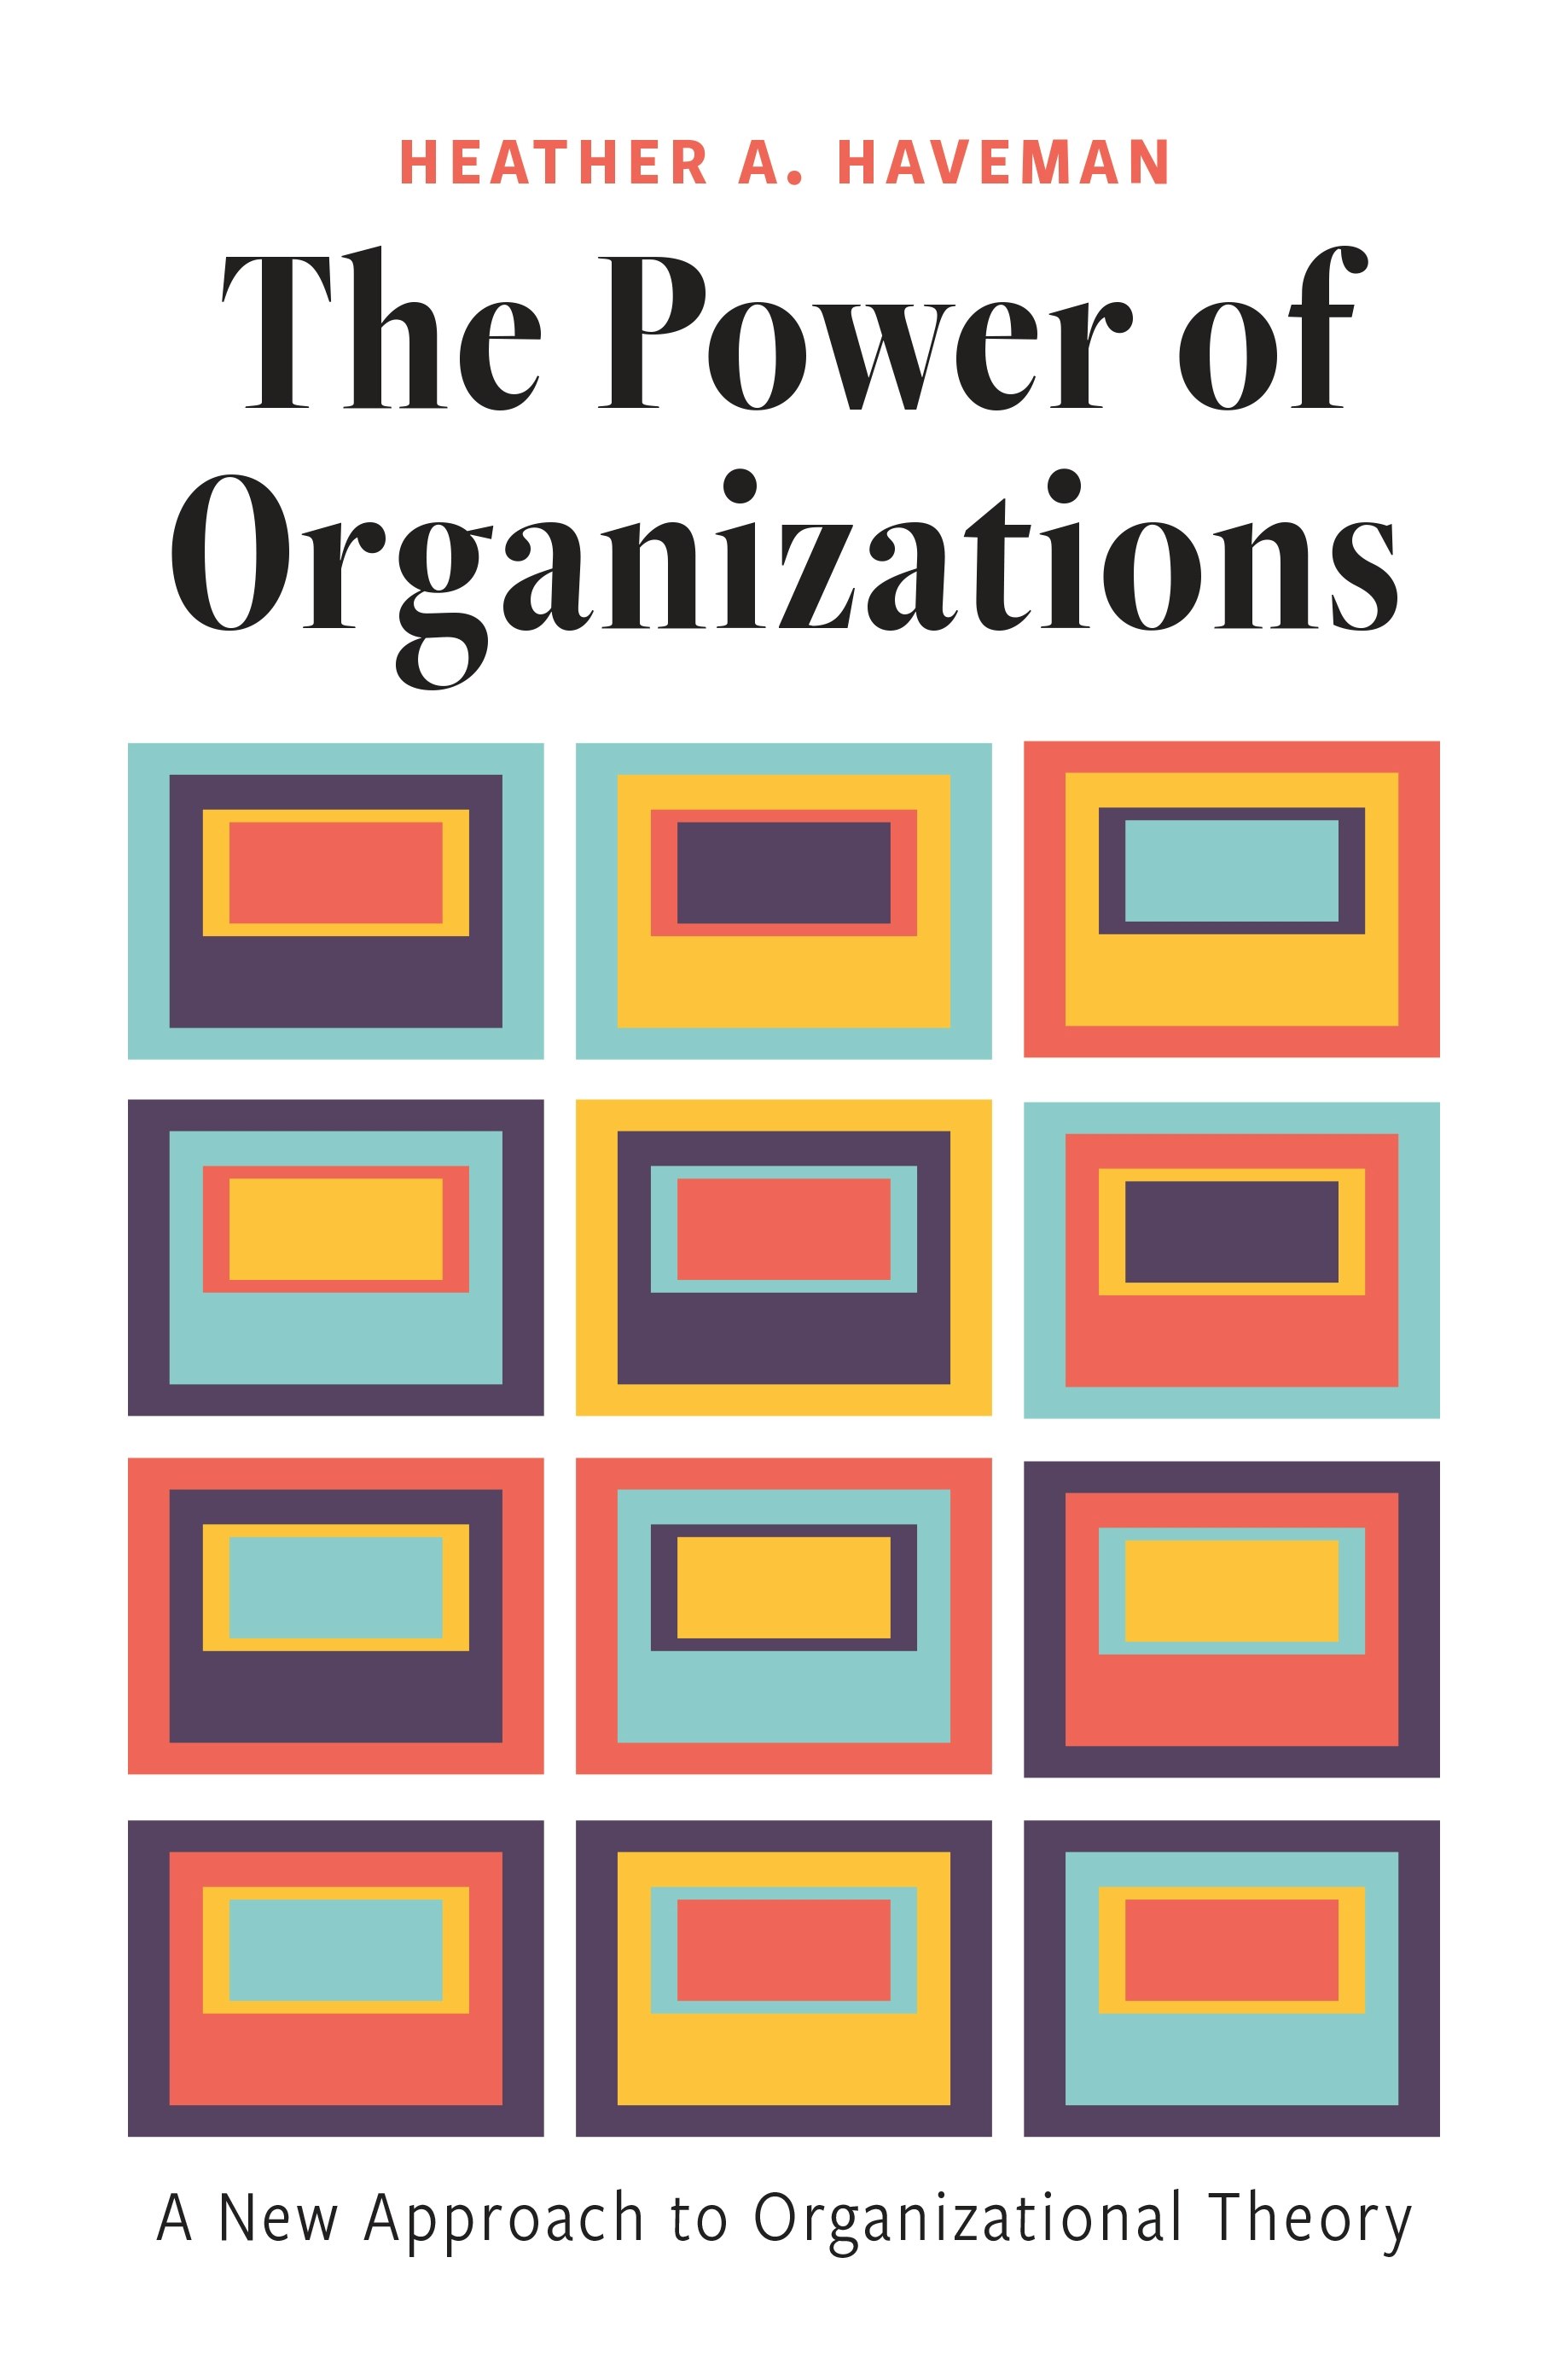 Approach　A　The　Organizations:　Organizational　of　Power　to　New　Theory